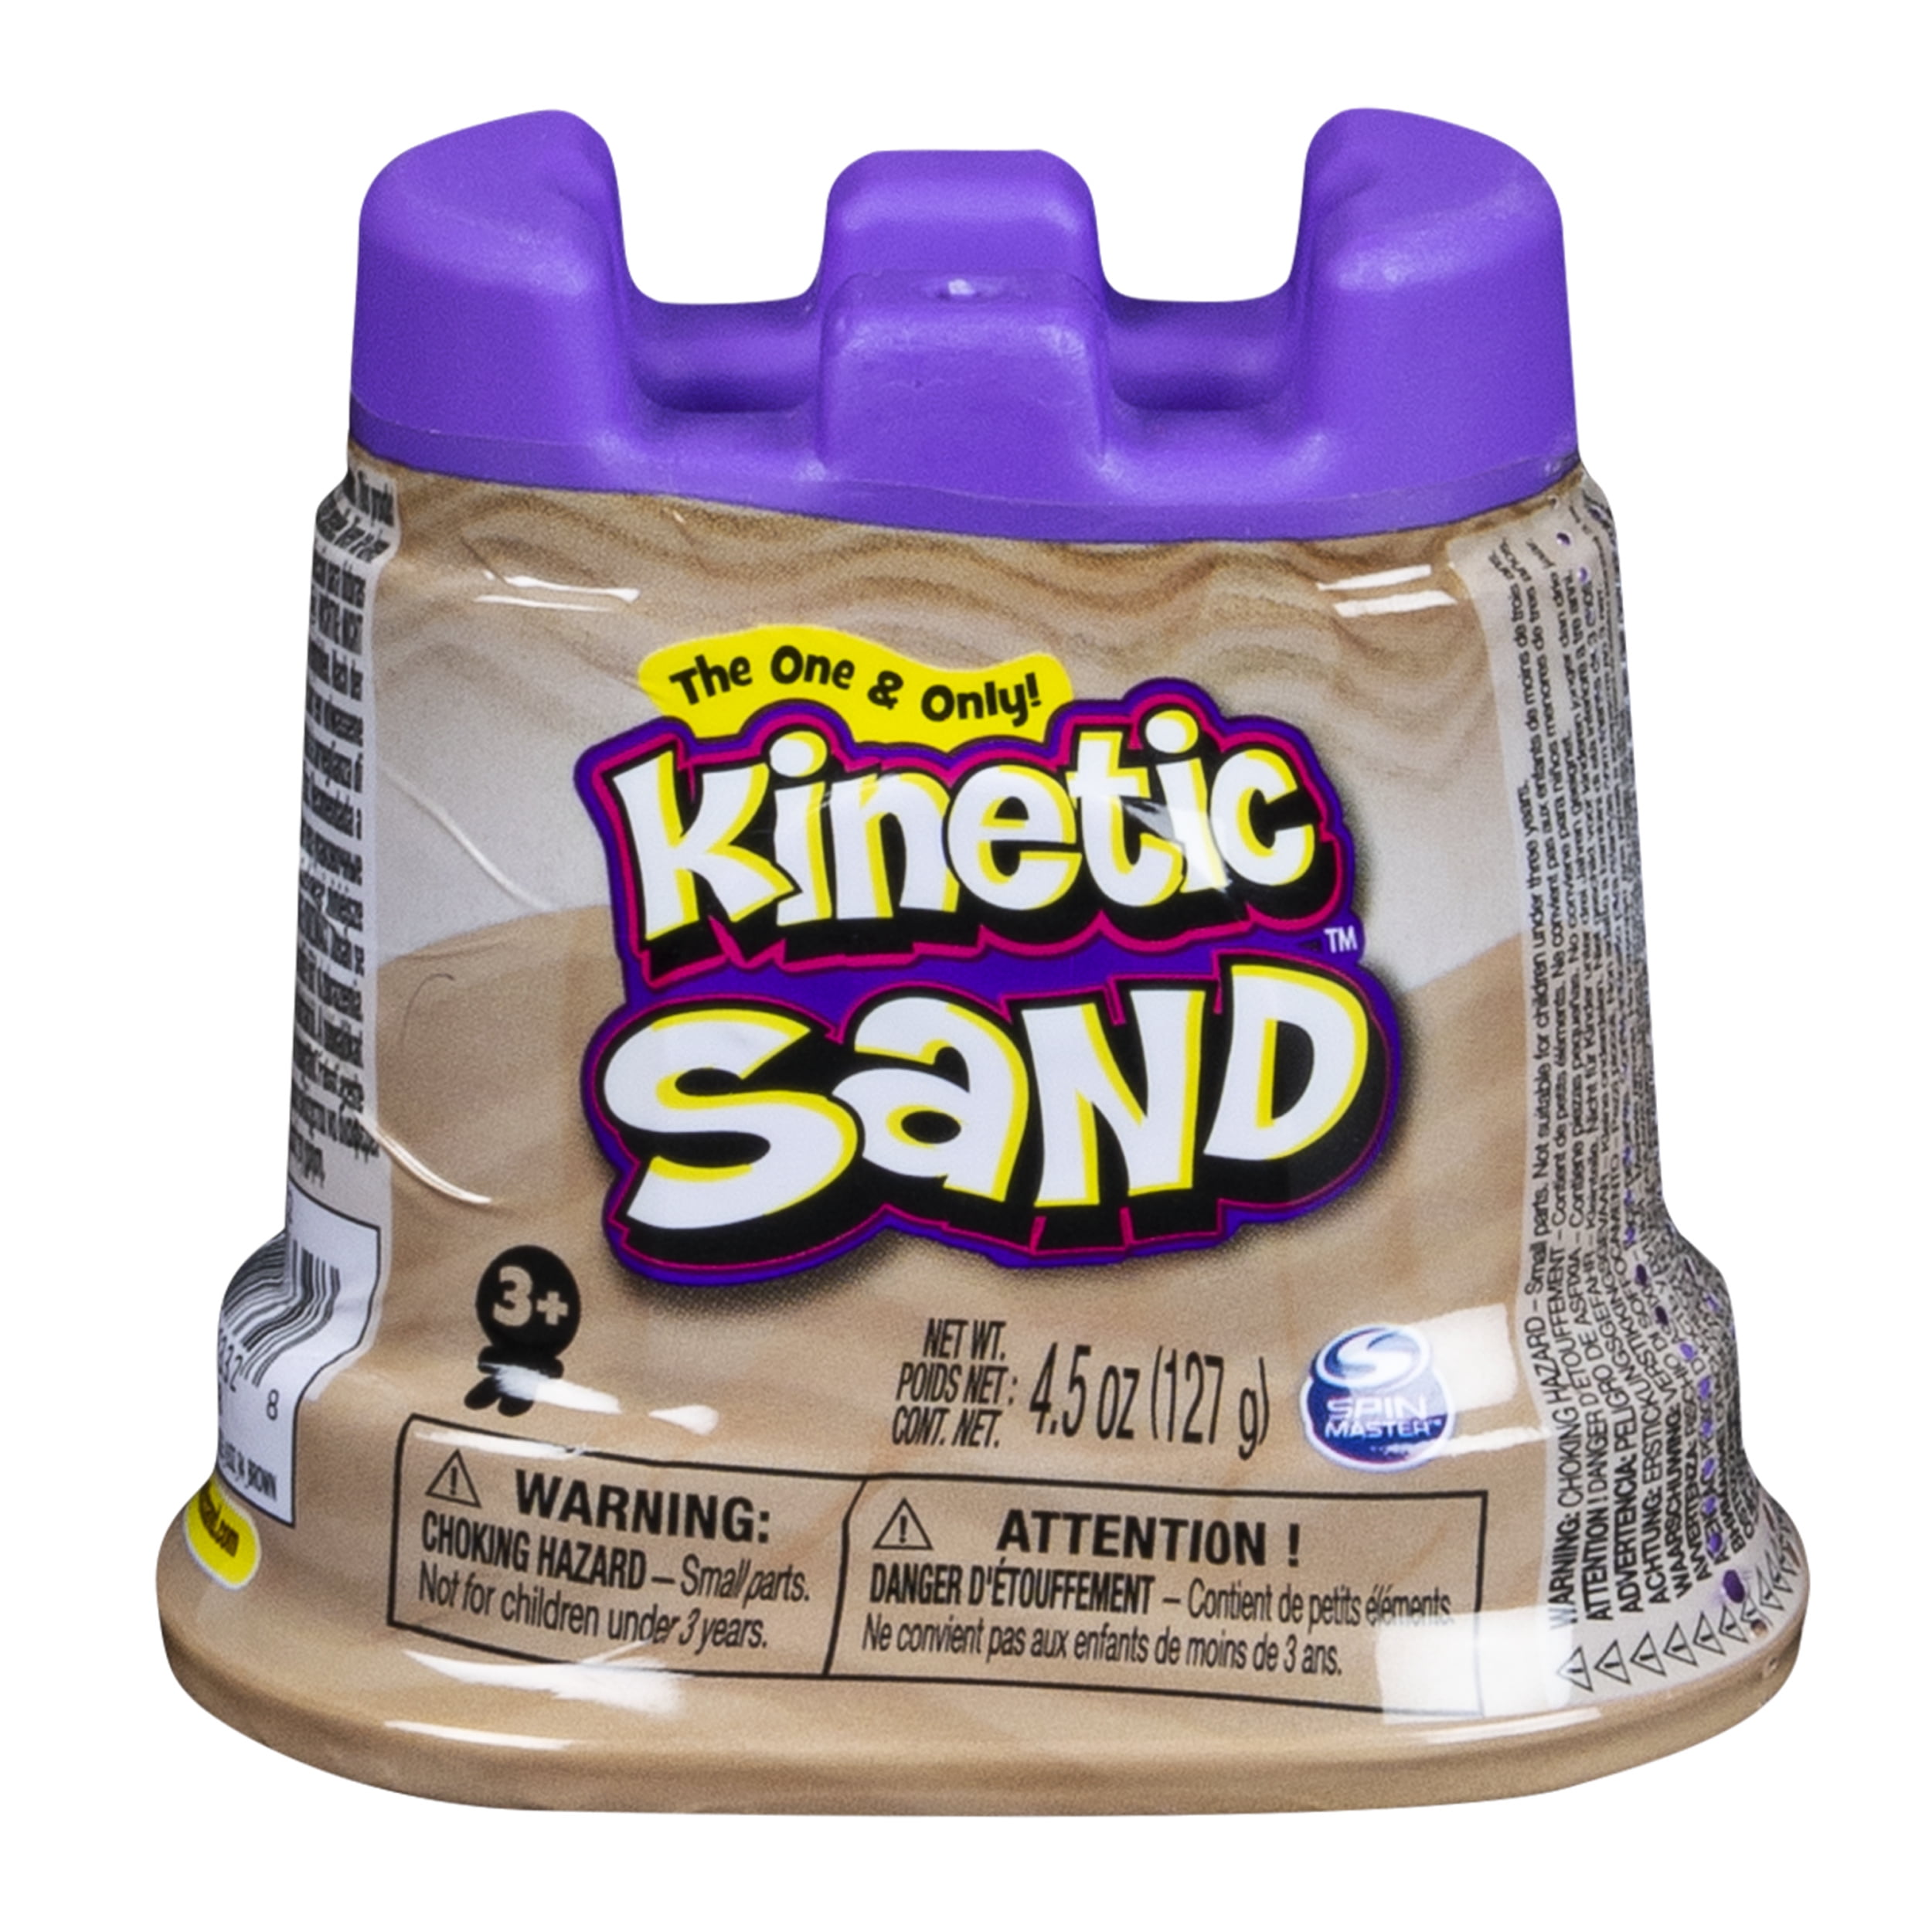  Kinetic Sand - Single Container - 4.5 oz - Brown : Toys & Games